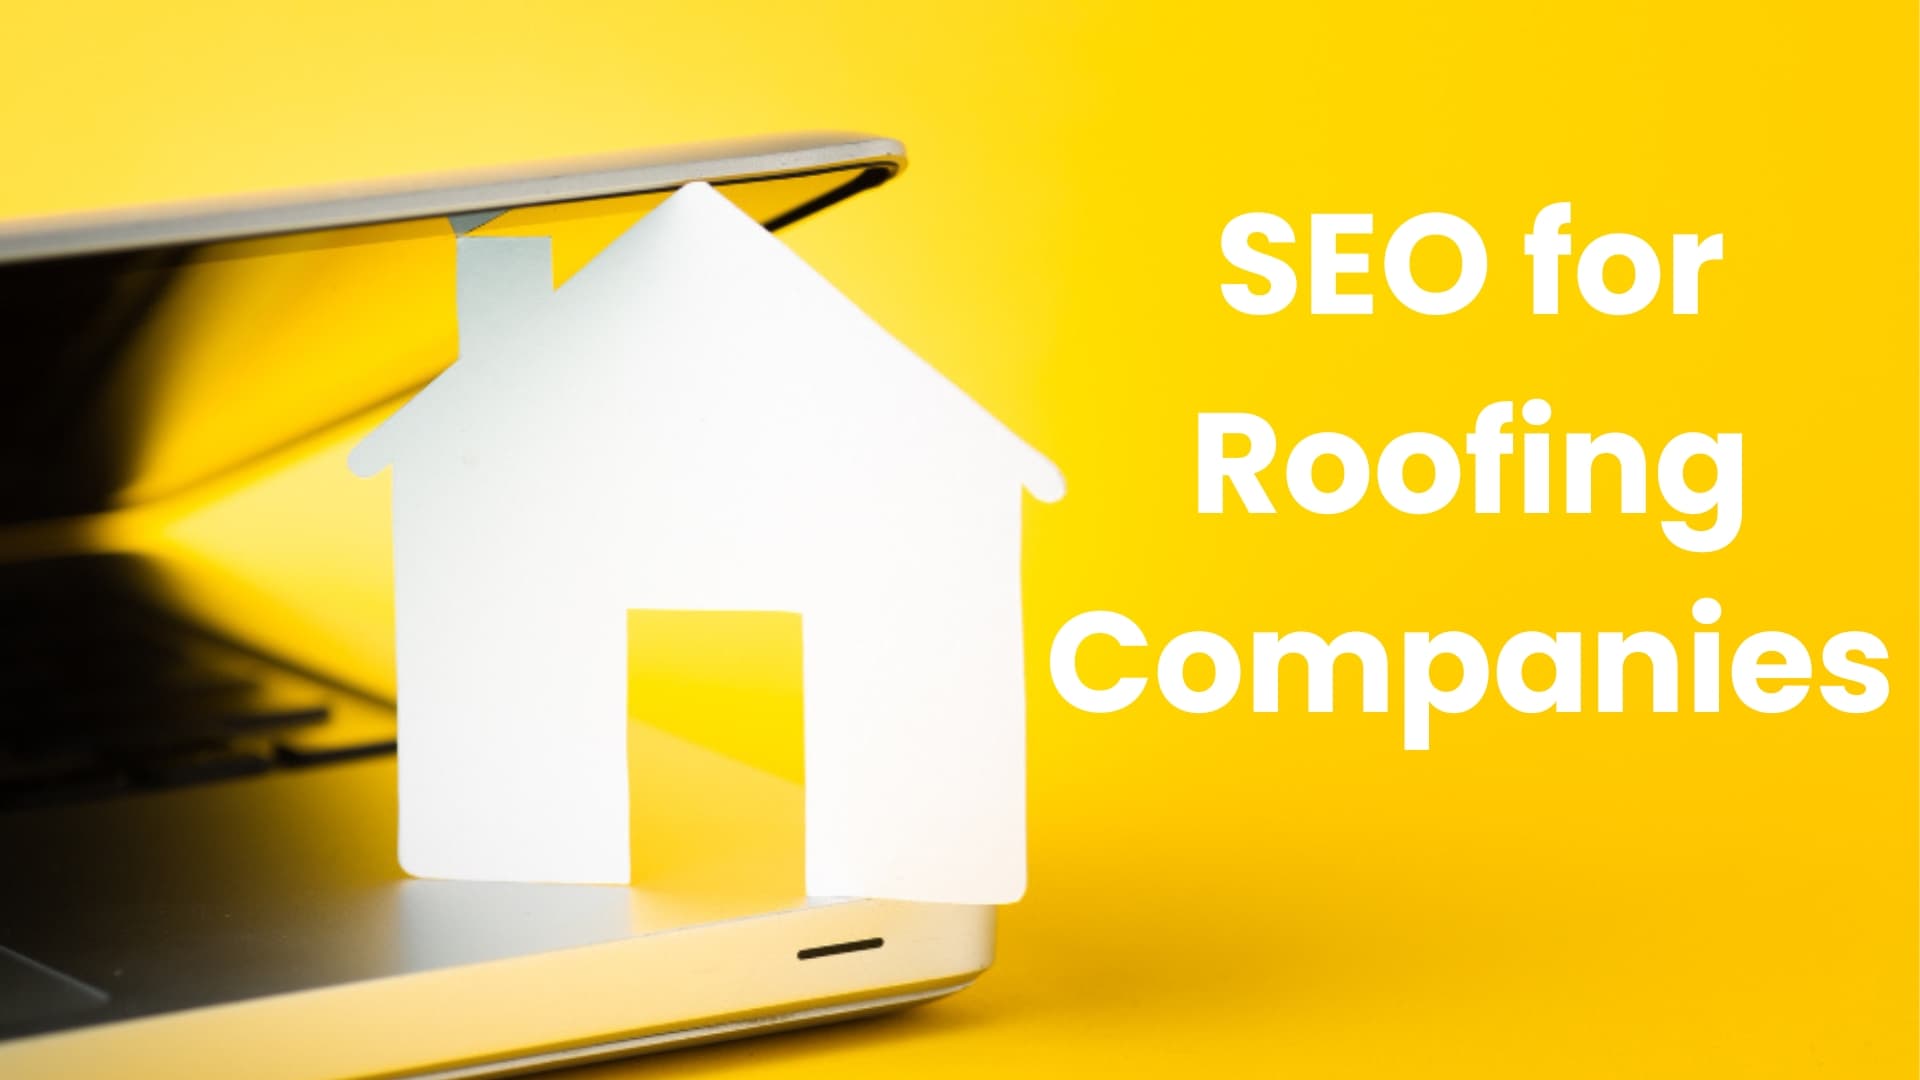 SEO for Roofing Companies in United States (US)